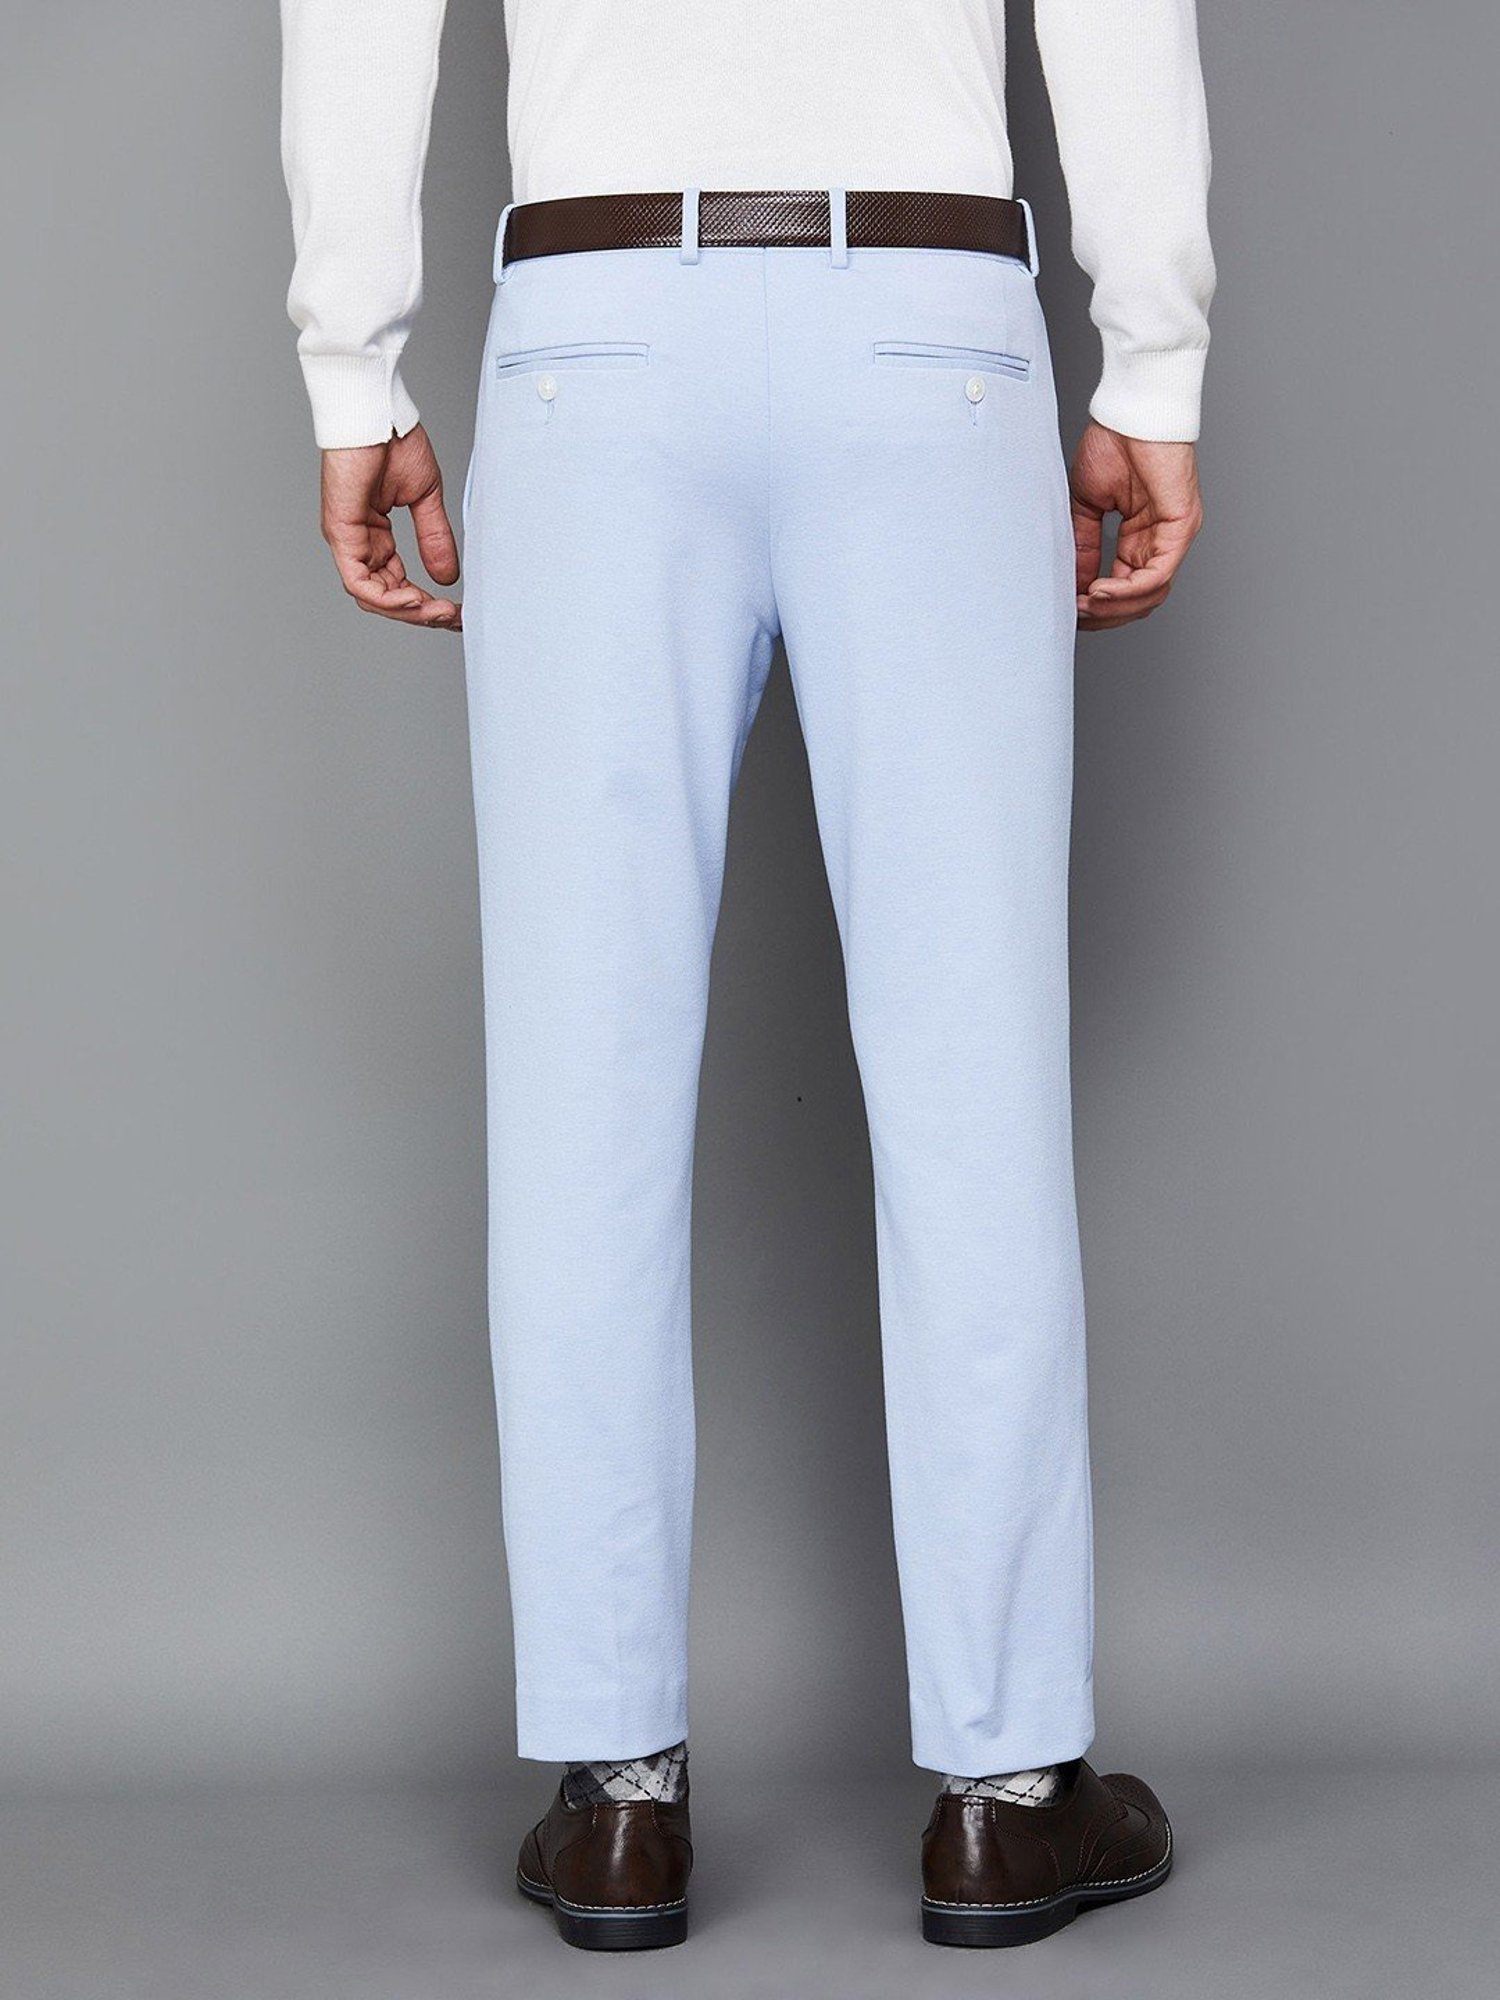 Buy KRAUS Light Blue Solid Tencel Relaxed Fit Women's Pants | Shoppers Stop